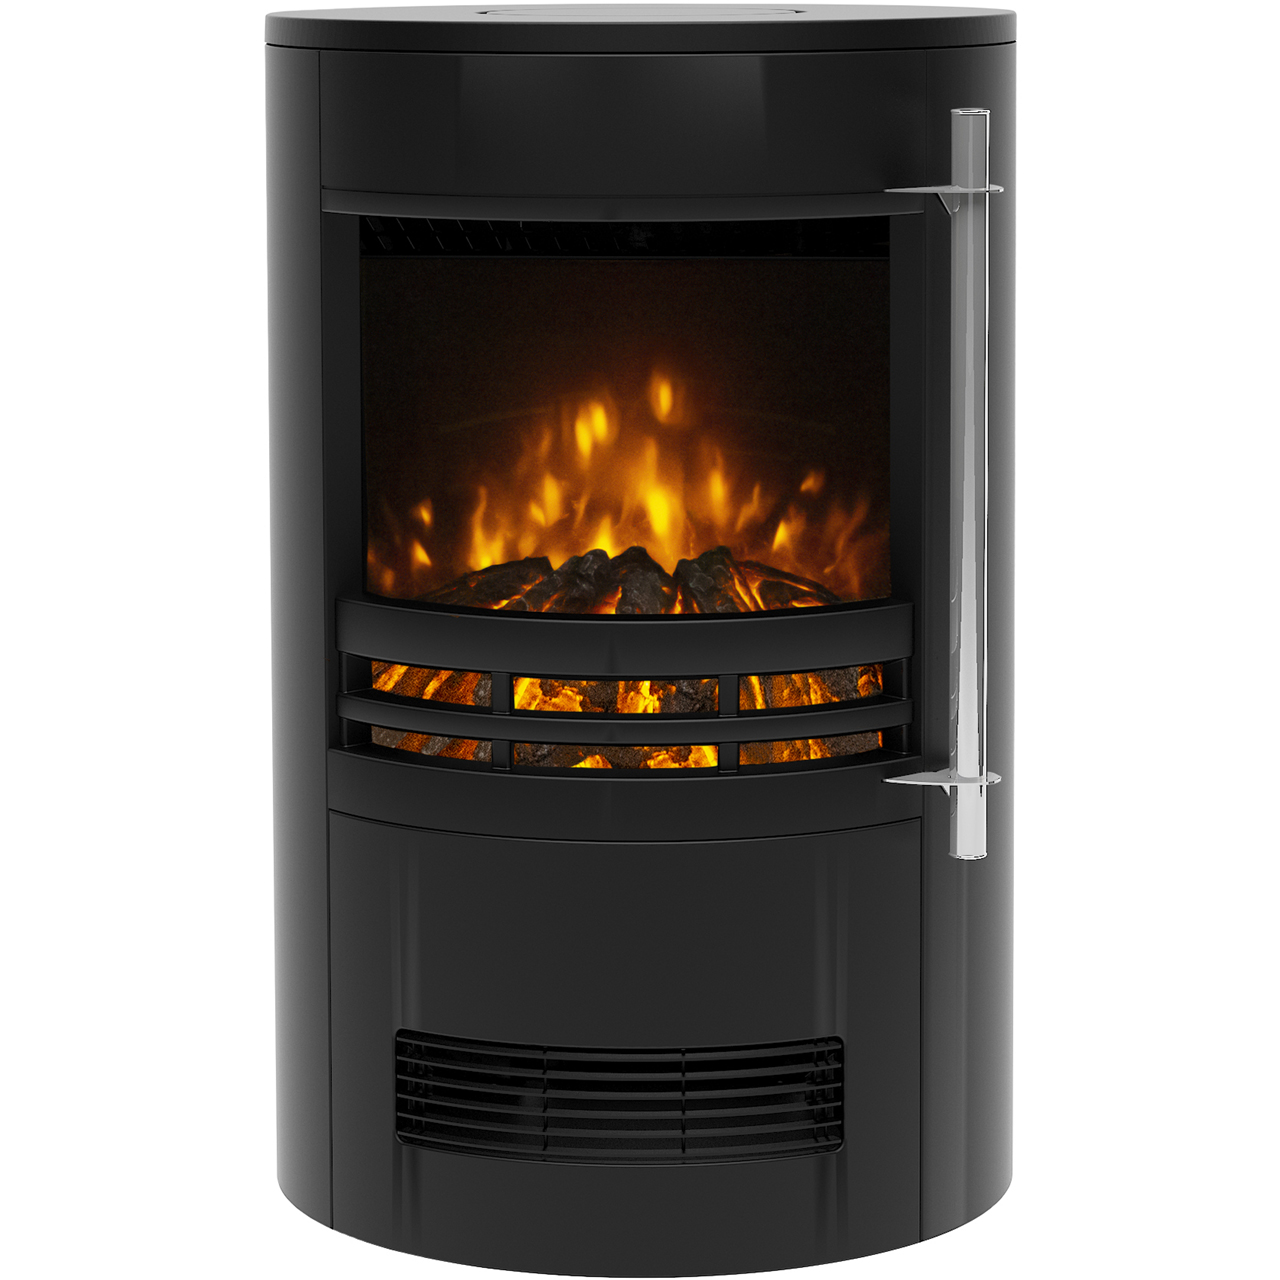 BeModern Tunstall 02757X Log Effect Electric Stove Review